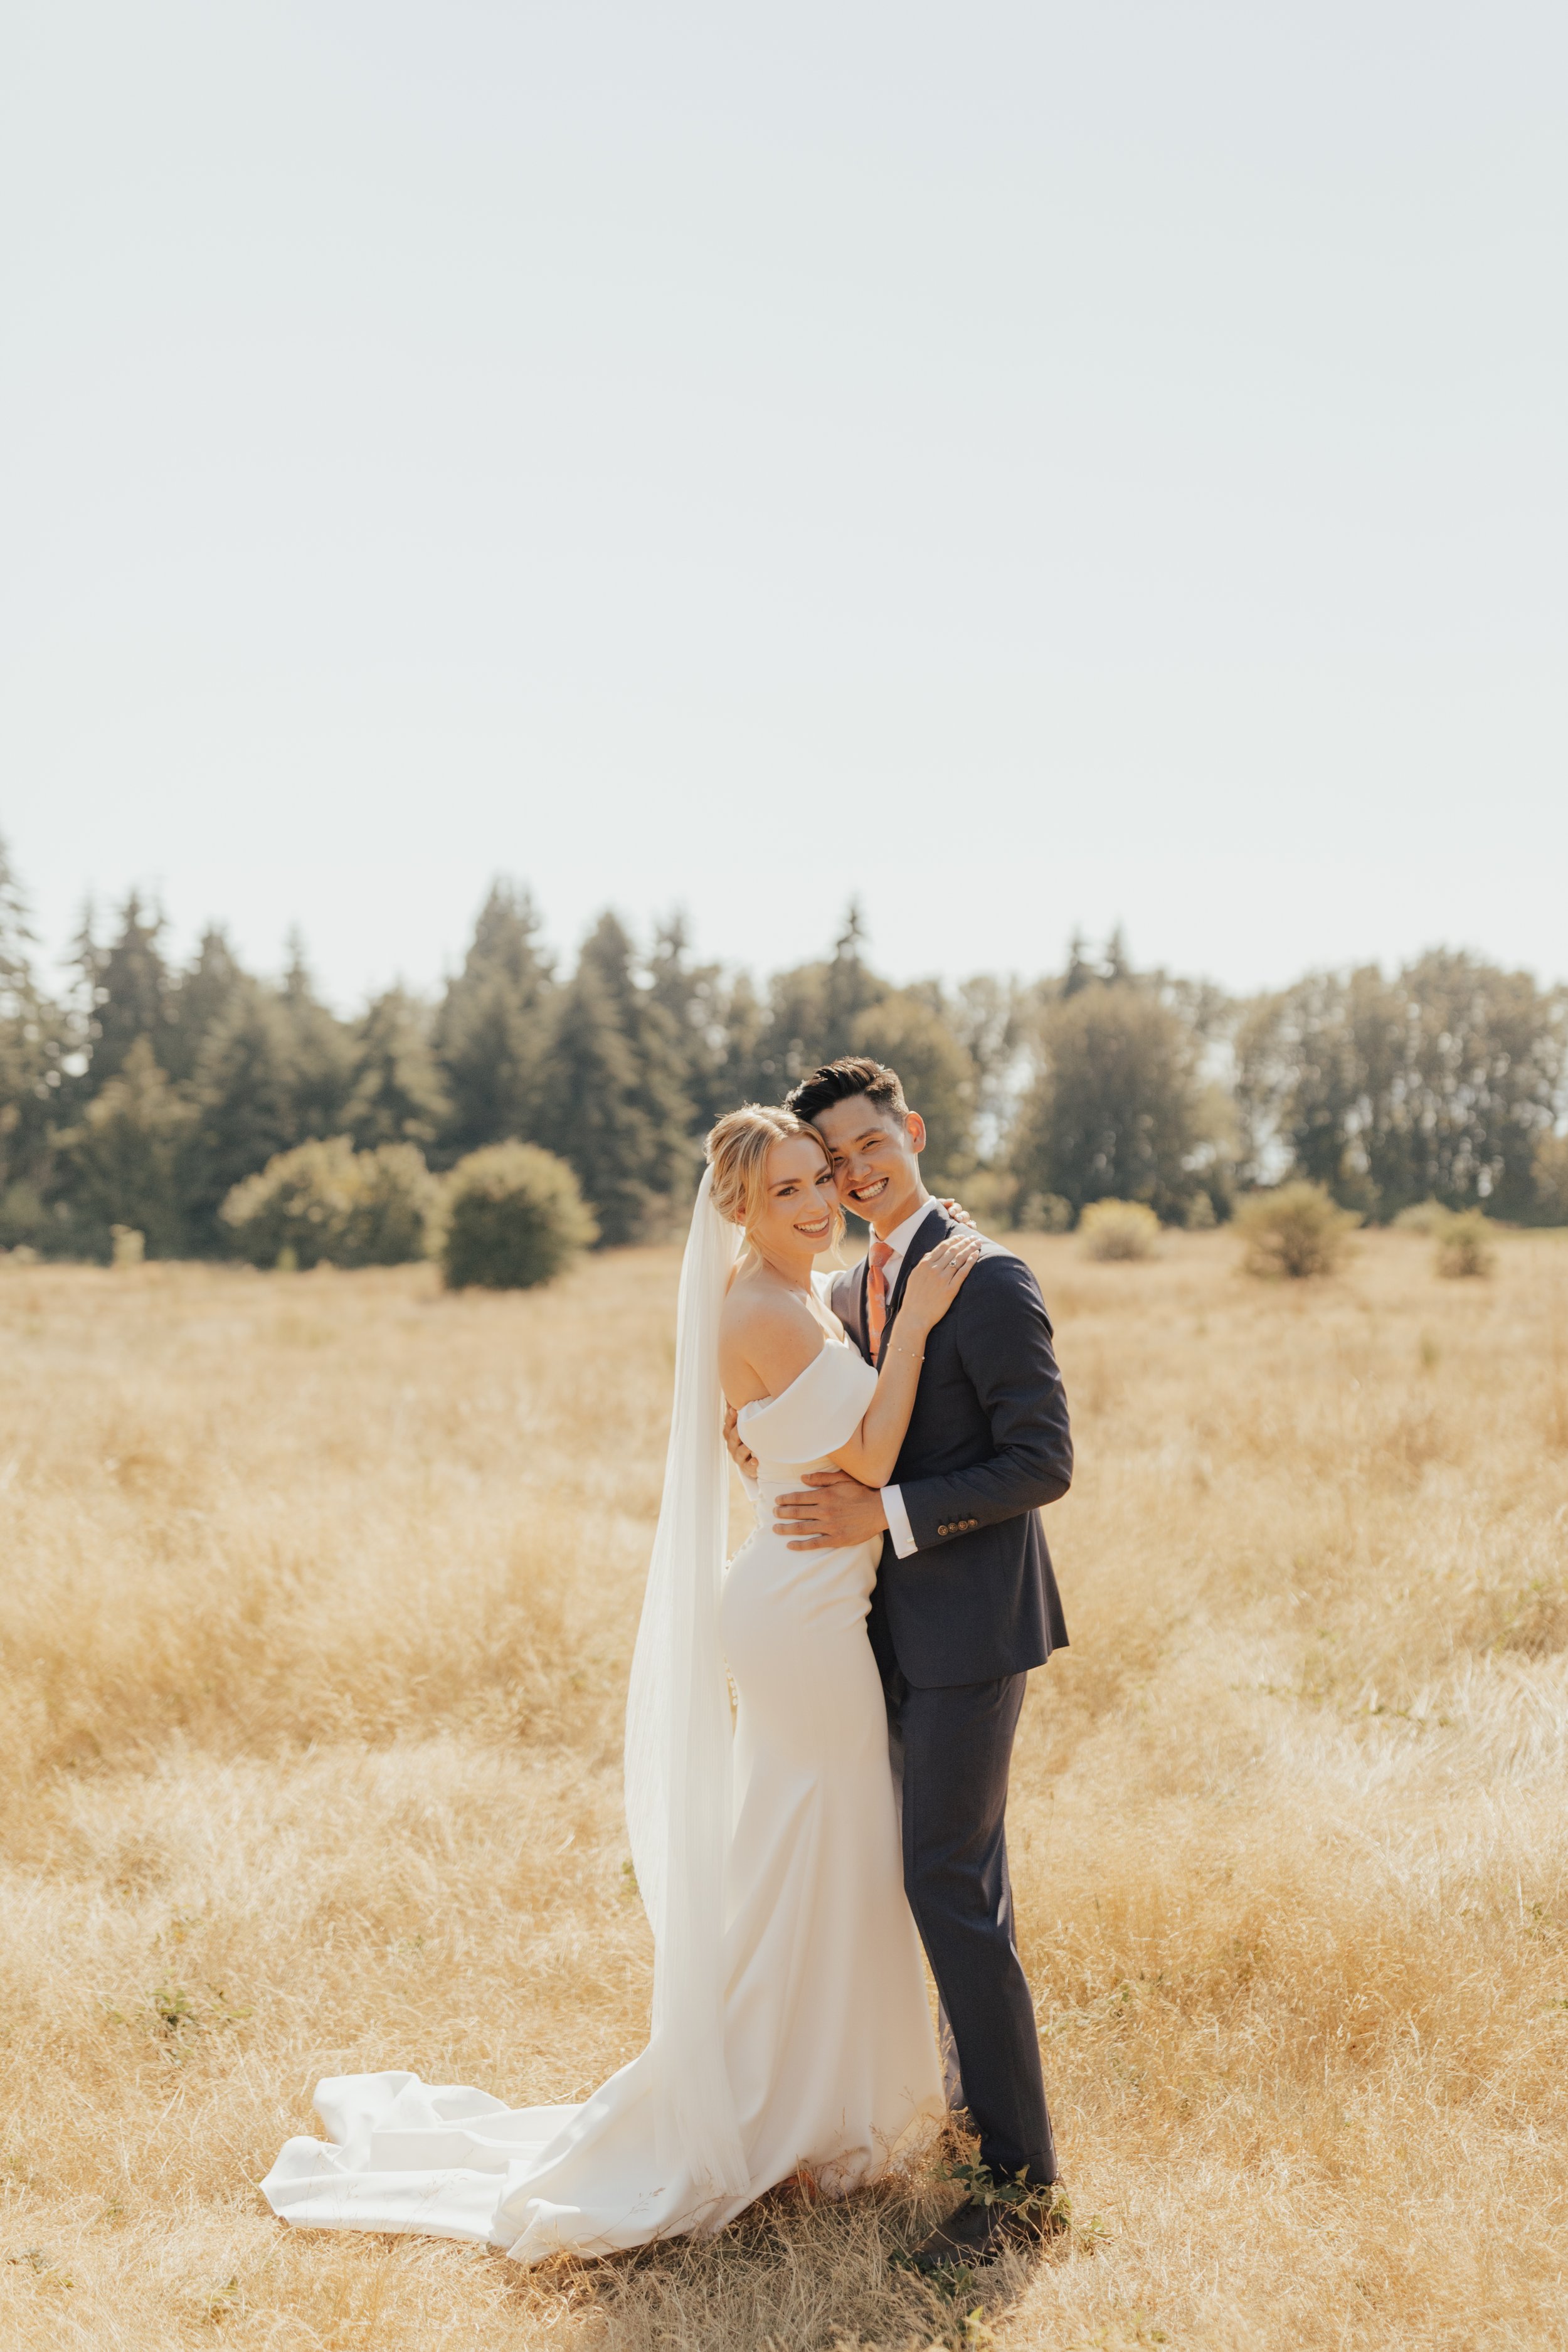 seattle-wedding-planner-pacific-engagements-discovery-park-formal-wedding-portraits-bride-and-groom-rachel-syrisko-photography